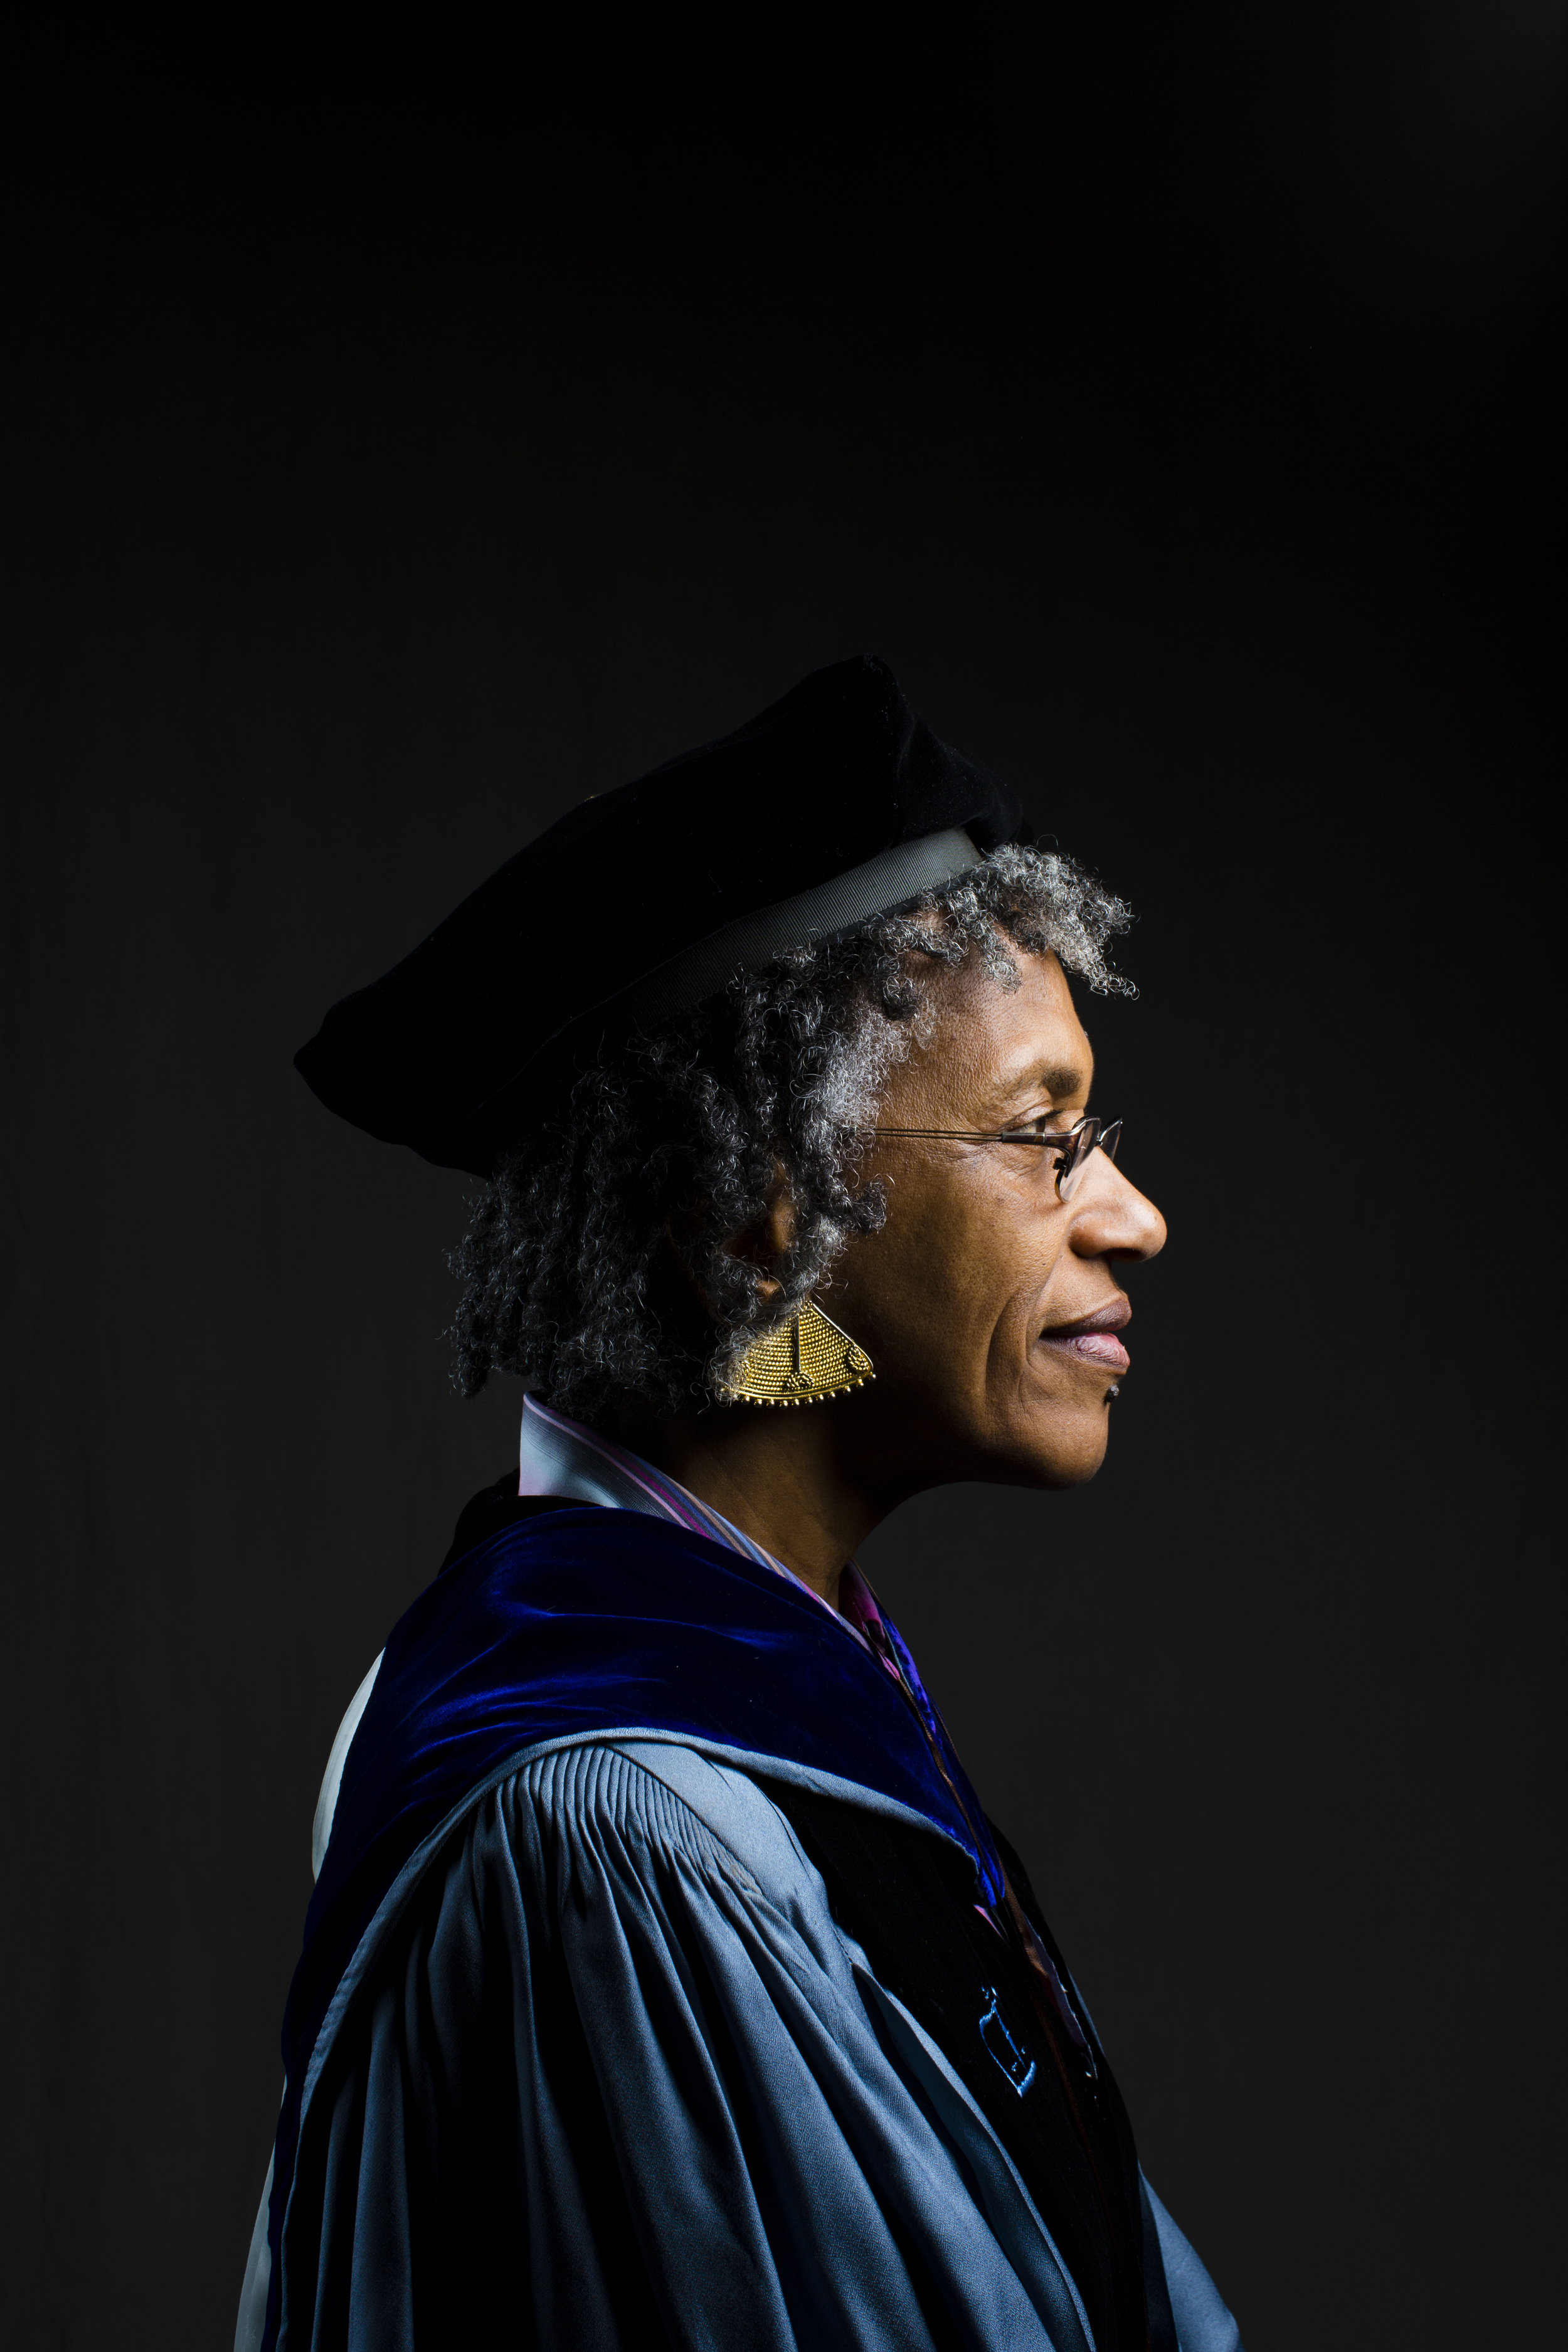  Associate Professor of Political Science Pearl Robinson is shown in the light-blue robe and gold tassels of Columbia University, where she earned her PhD. She has worn them to every Tufts graduation for the past forty years. “My gown has grown old w